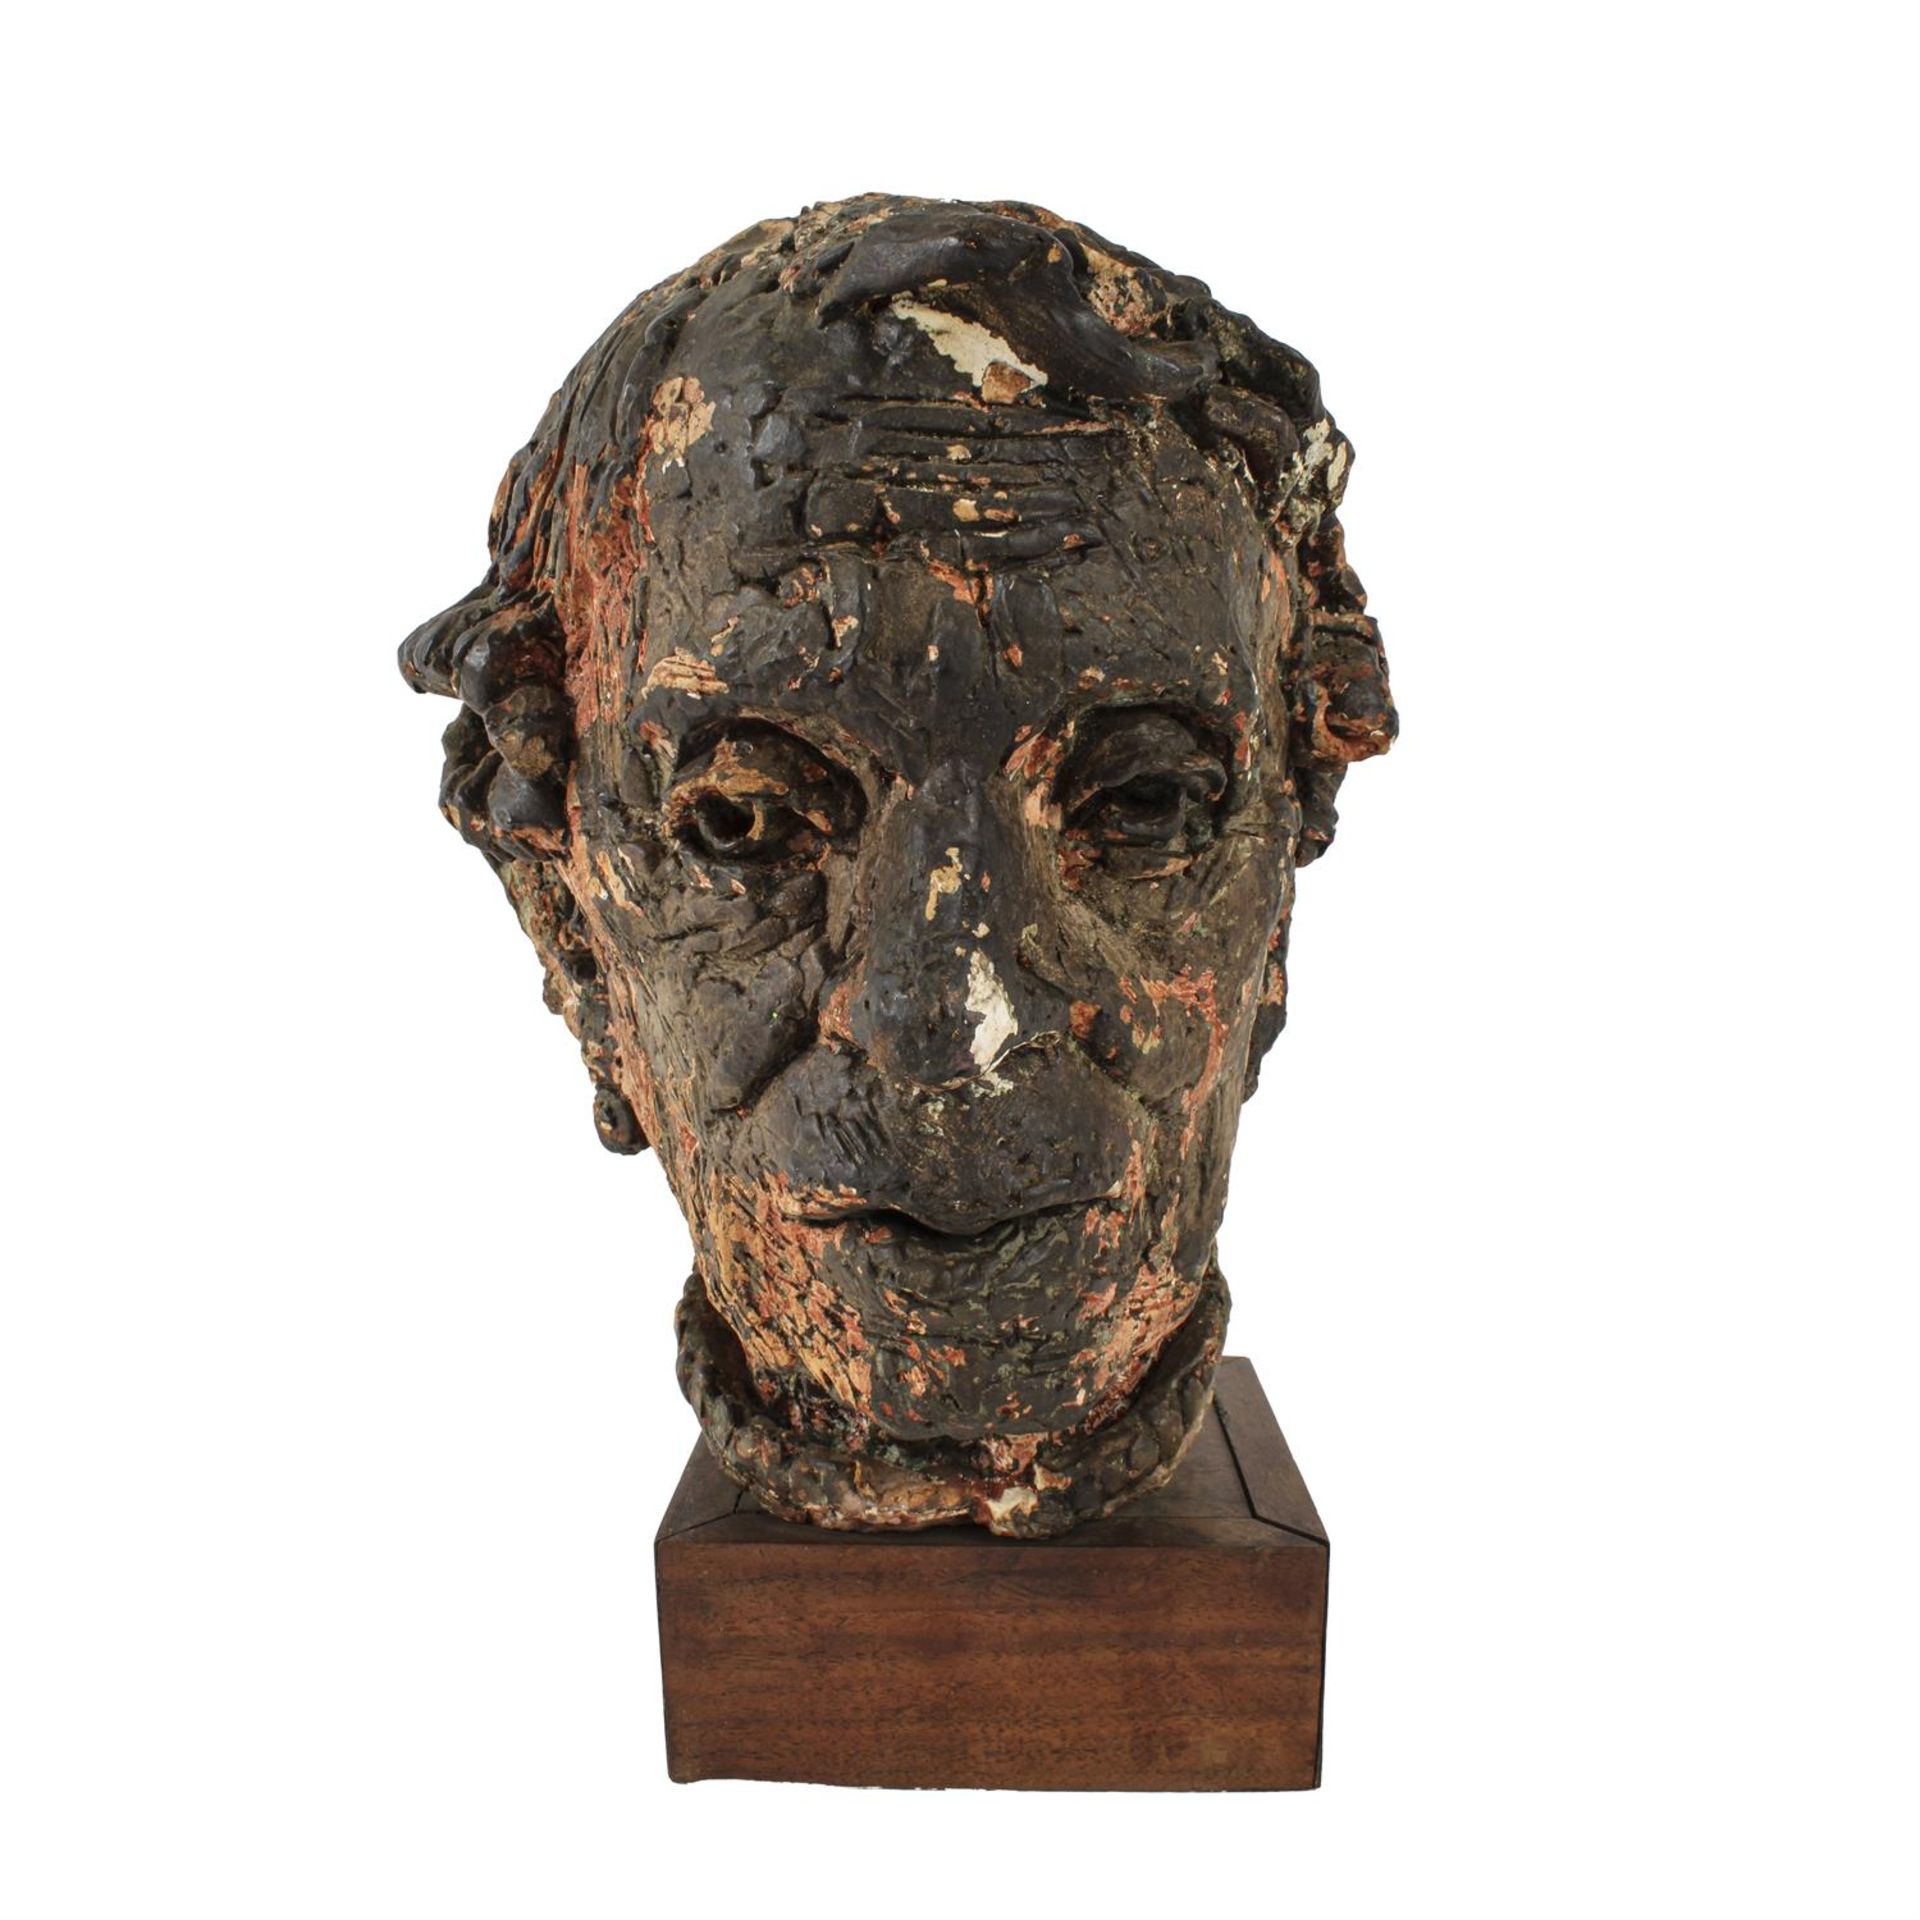 Clay study of a male head in the style of Jacob Epstein